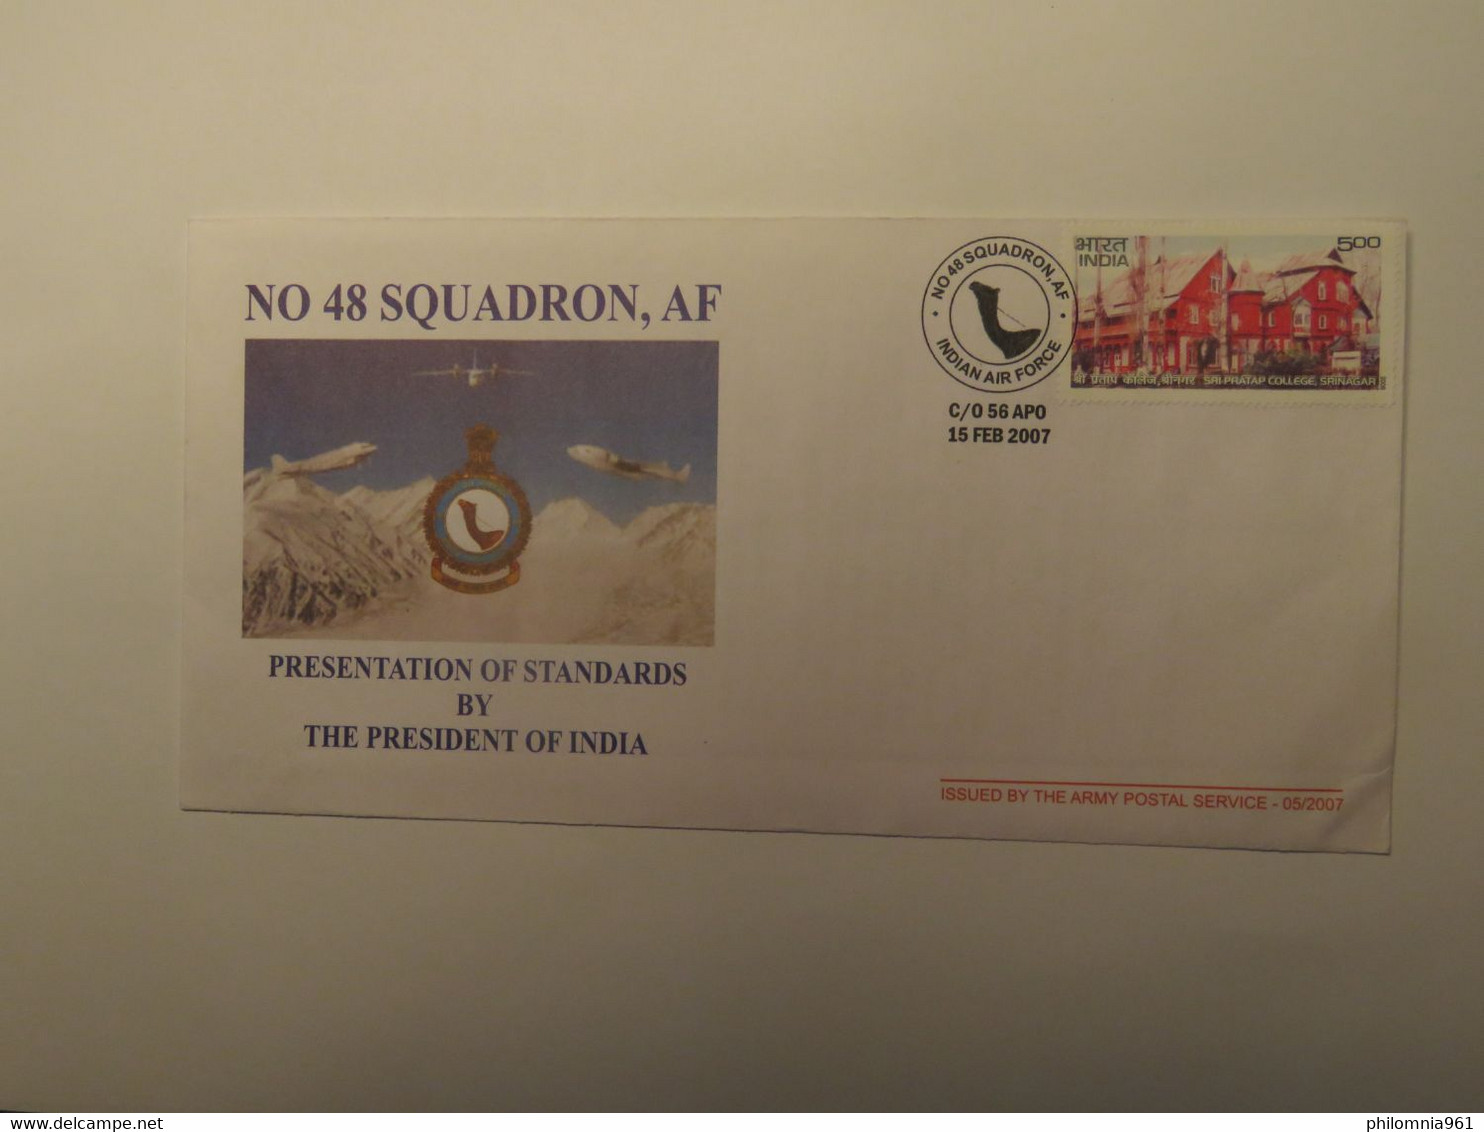 INDIA NO 48 SQUADRON, AF INDIAN AIR FORCE COVER 2007 - Used Stamps